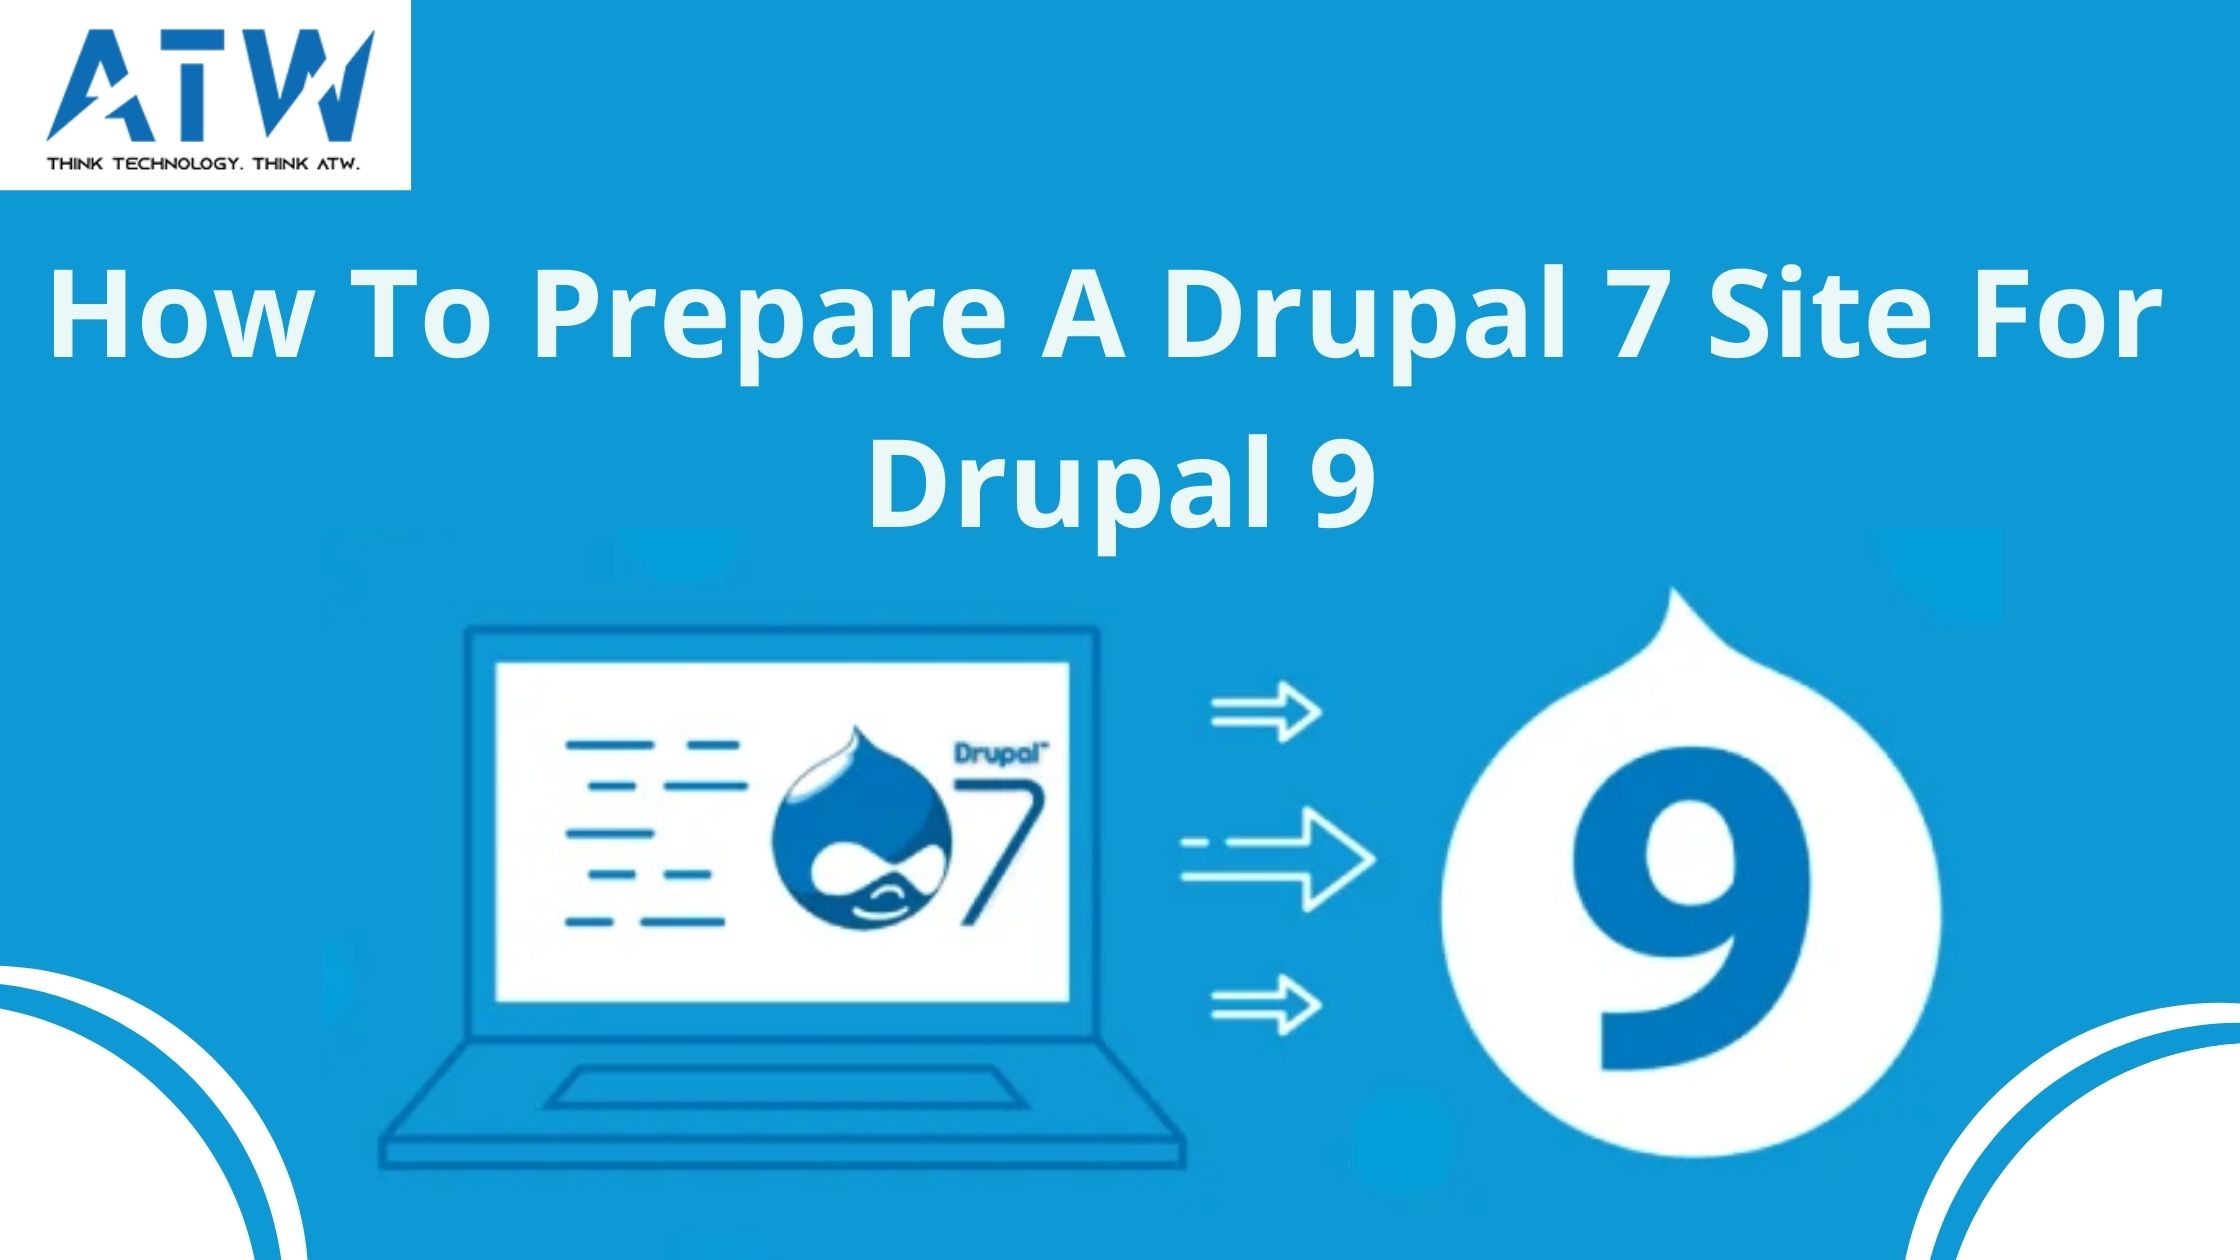 How To Prepare A Drupal 7 Site For Drupal 9